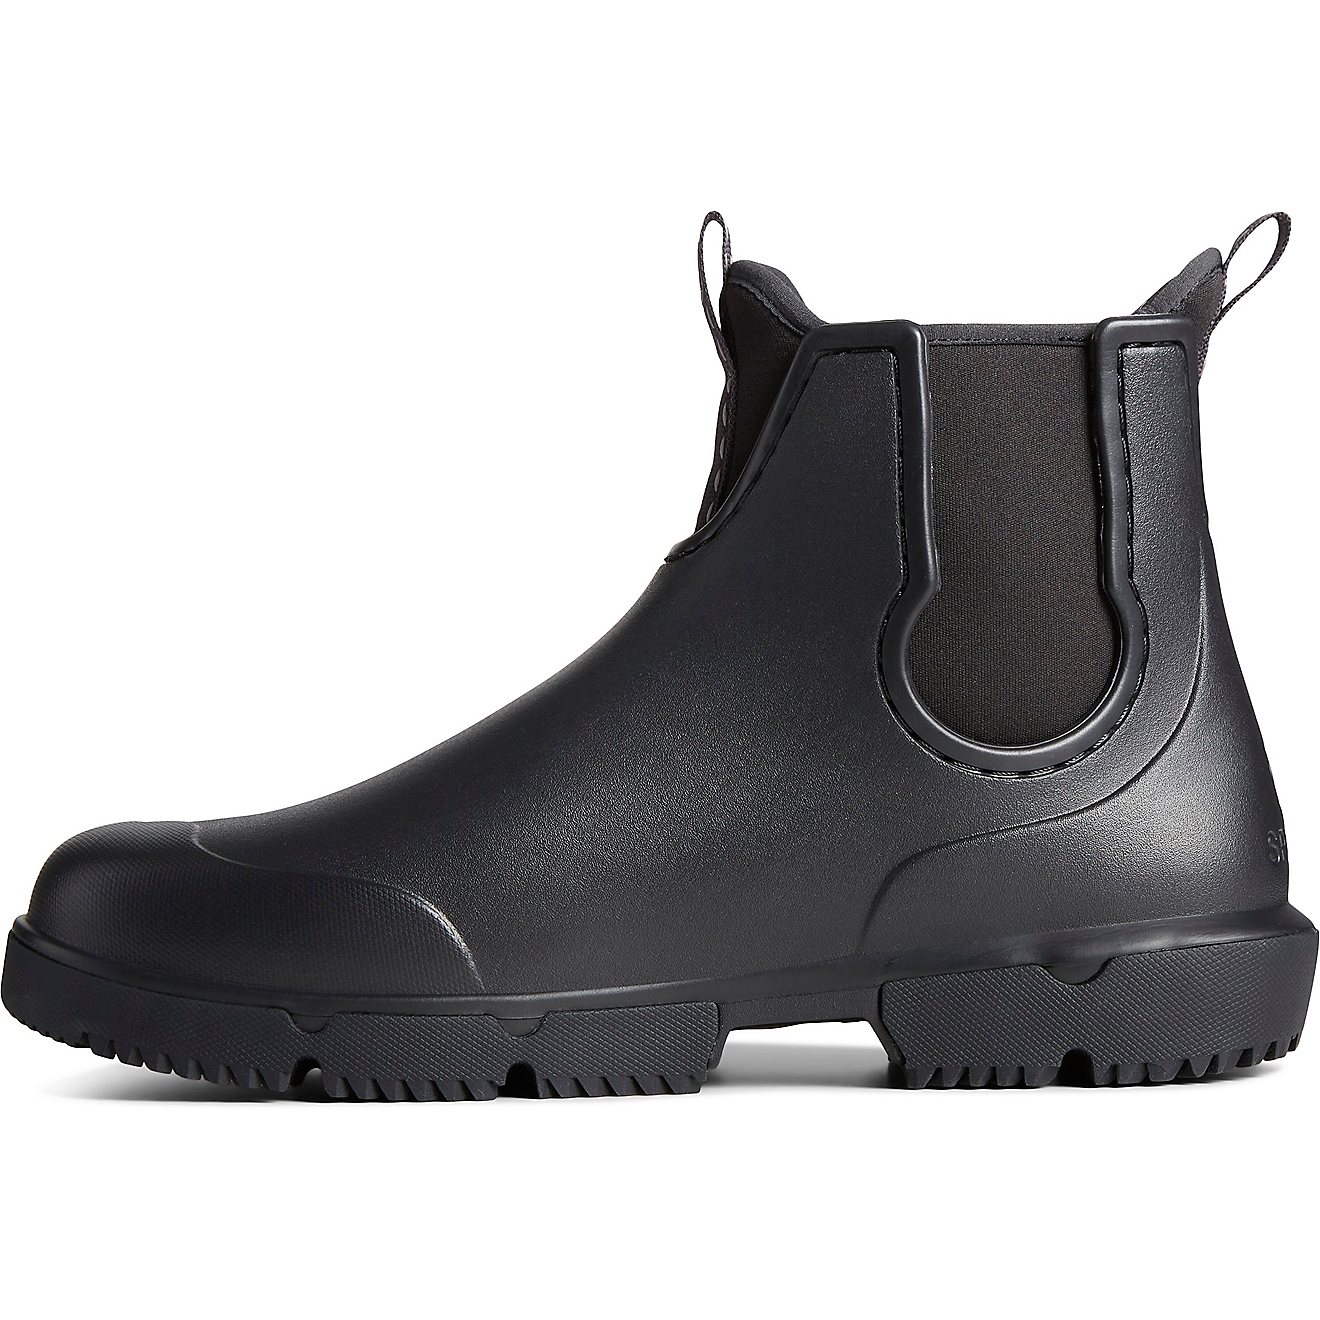 Sperry Men's Float Rain Boots | Free Shipping at Academy